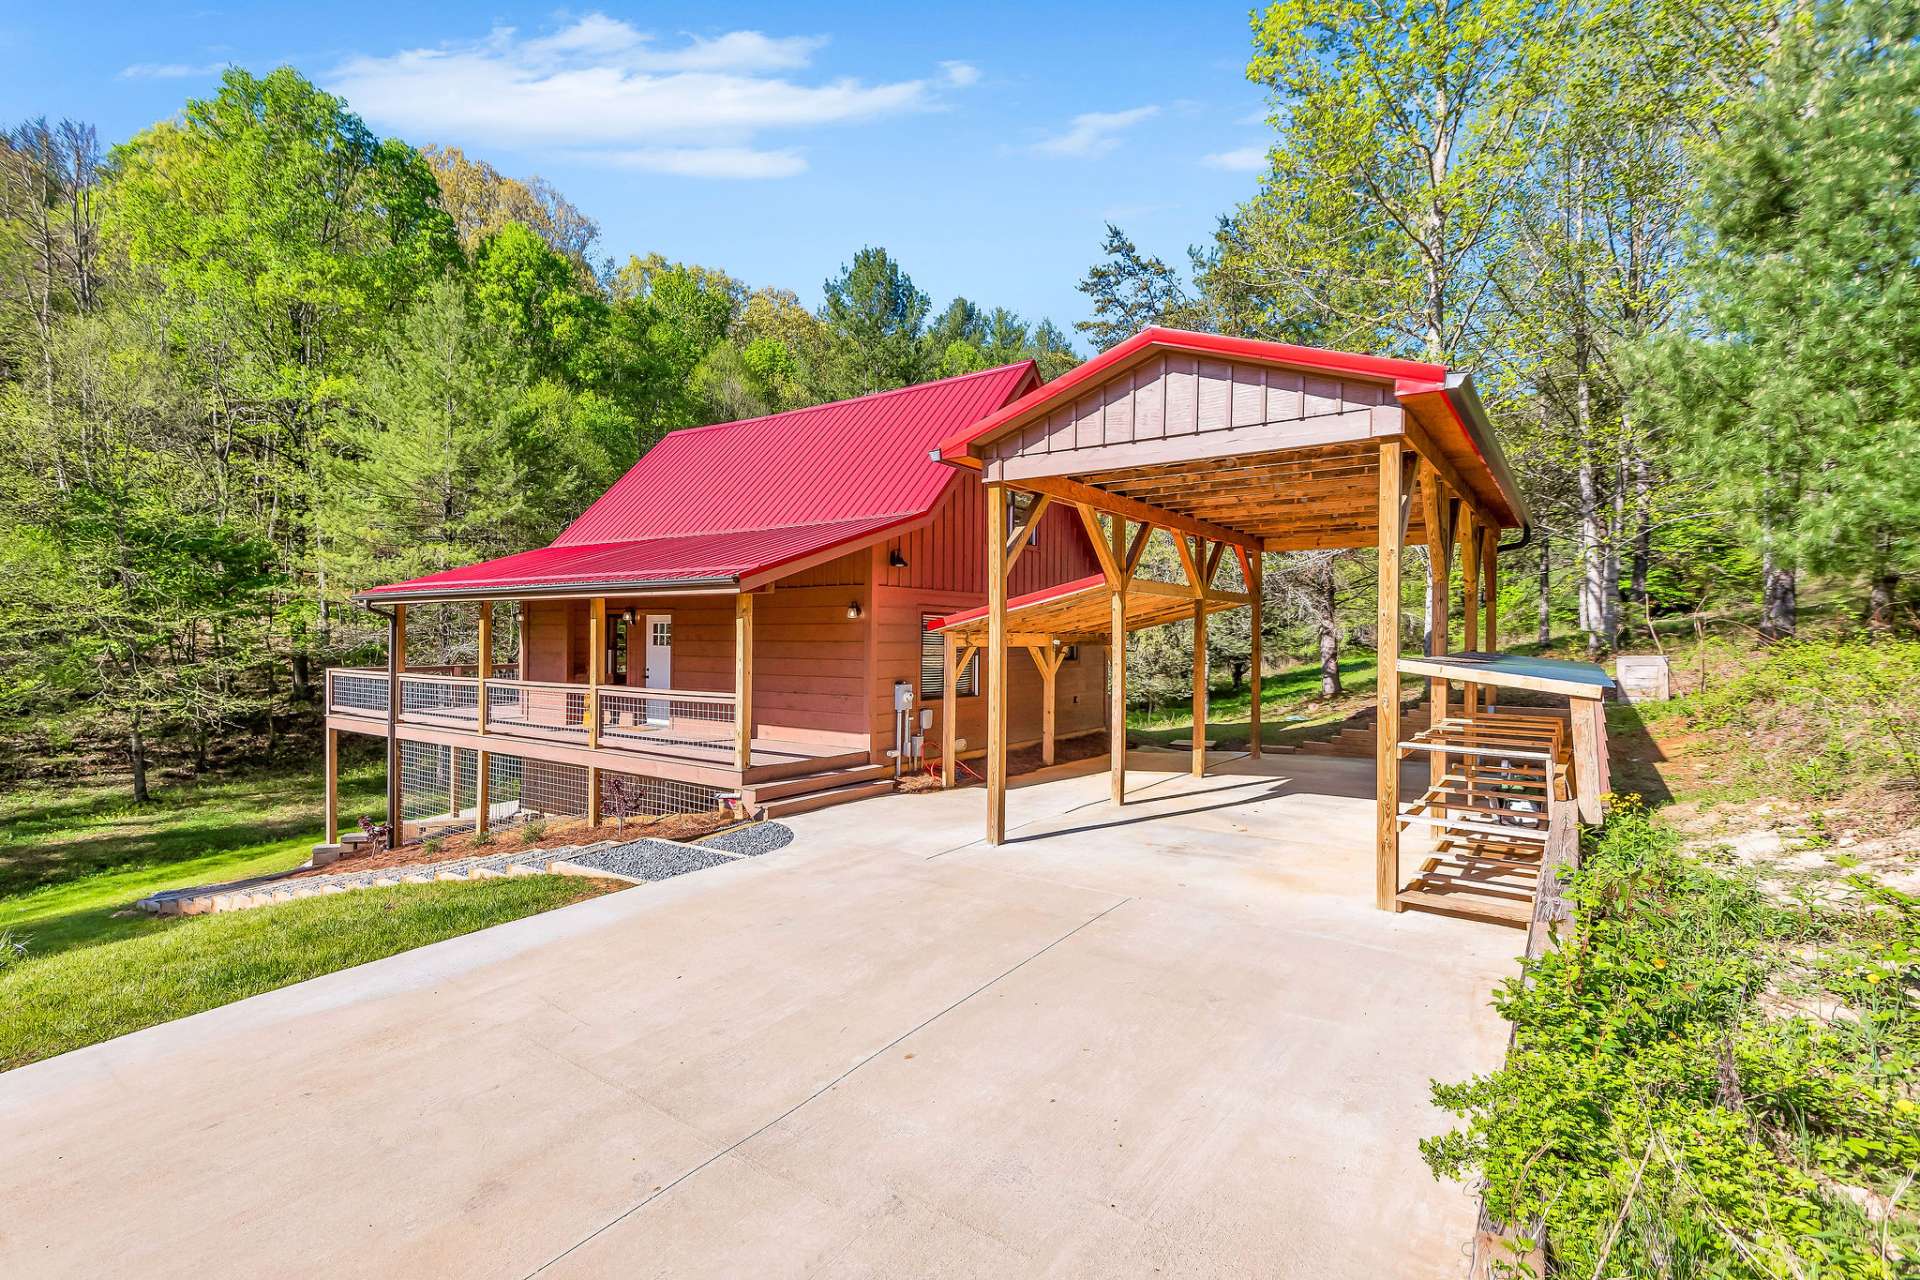 This home is complete with an RV shelter and full hookups, catering to the needs of camping enthusiasts.